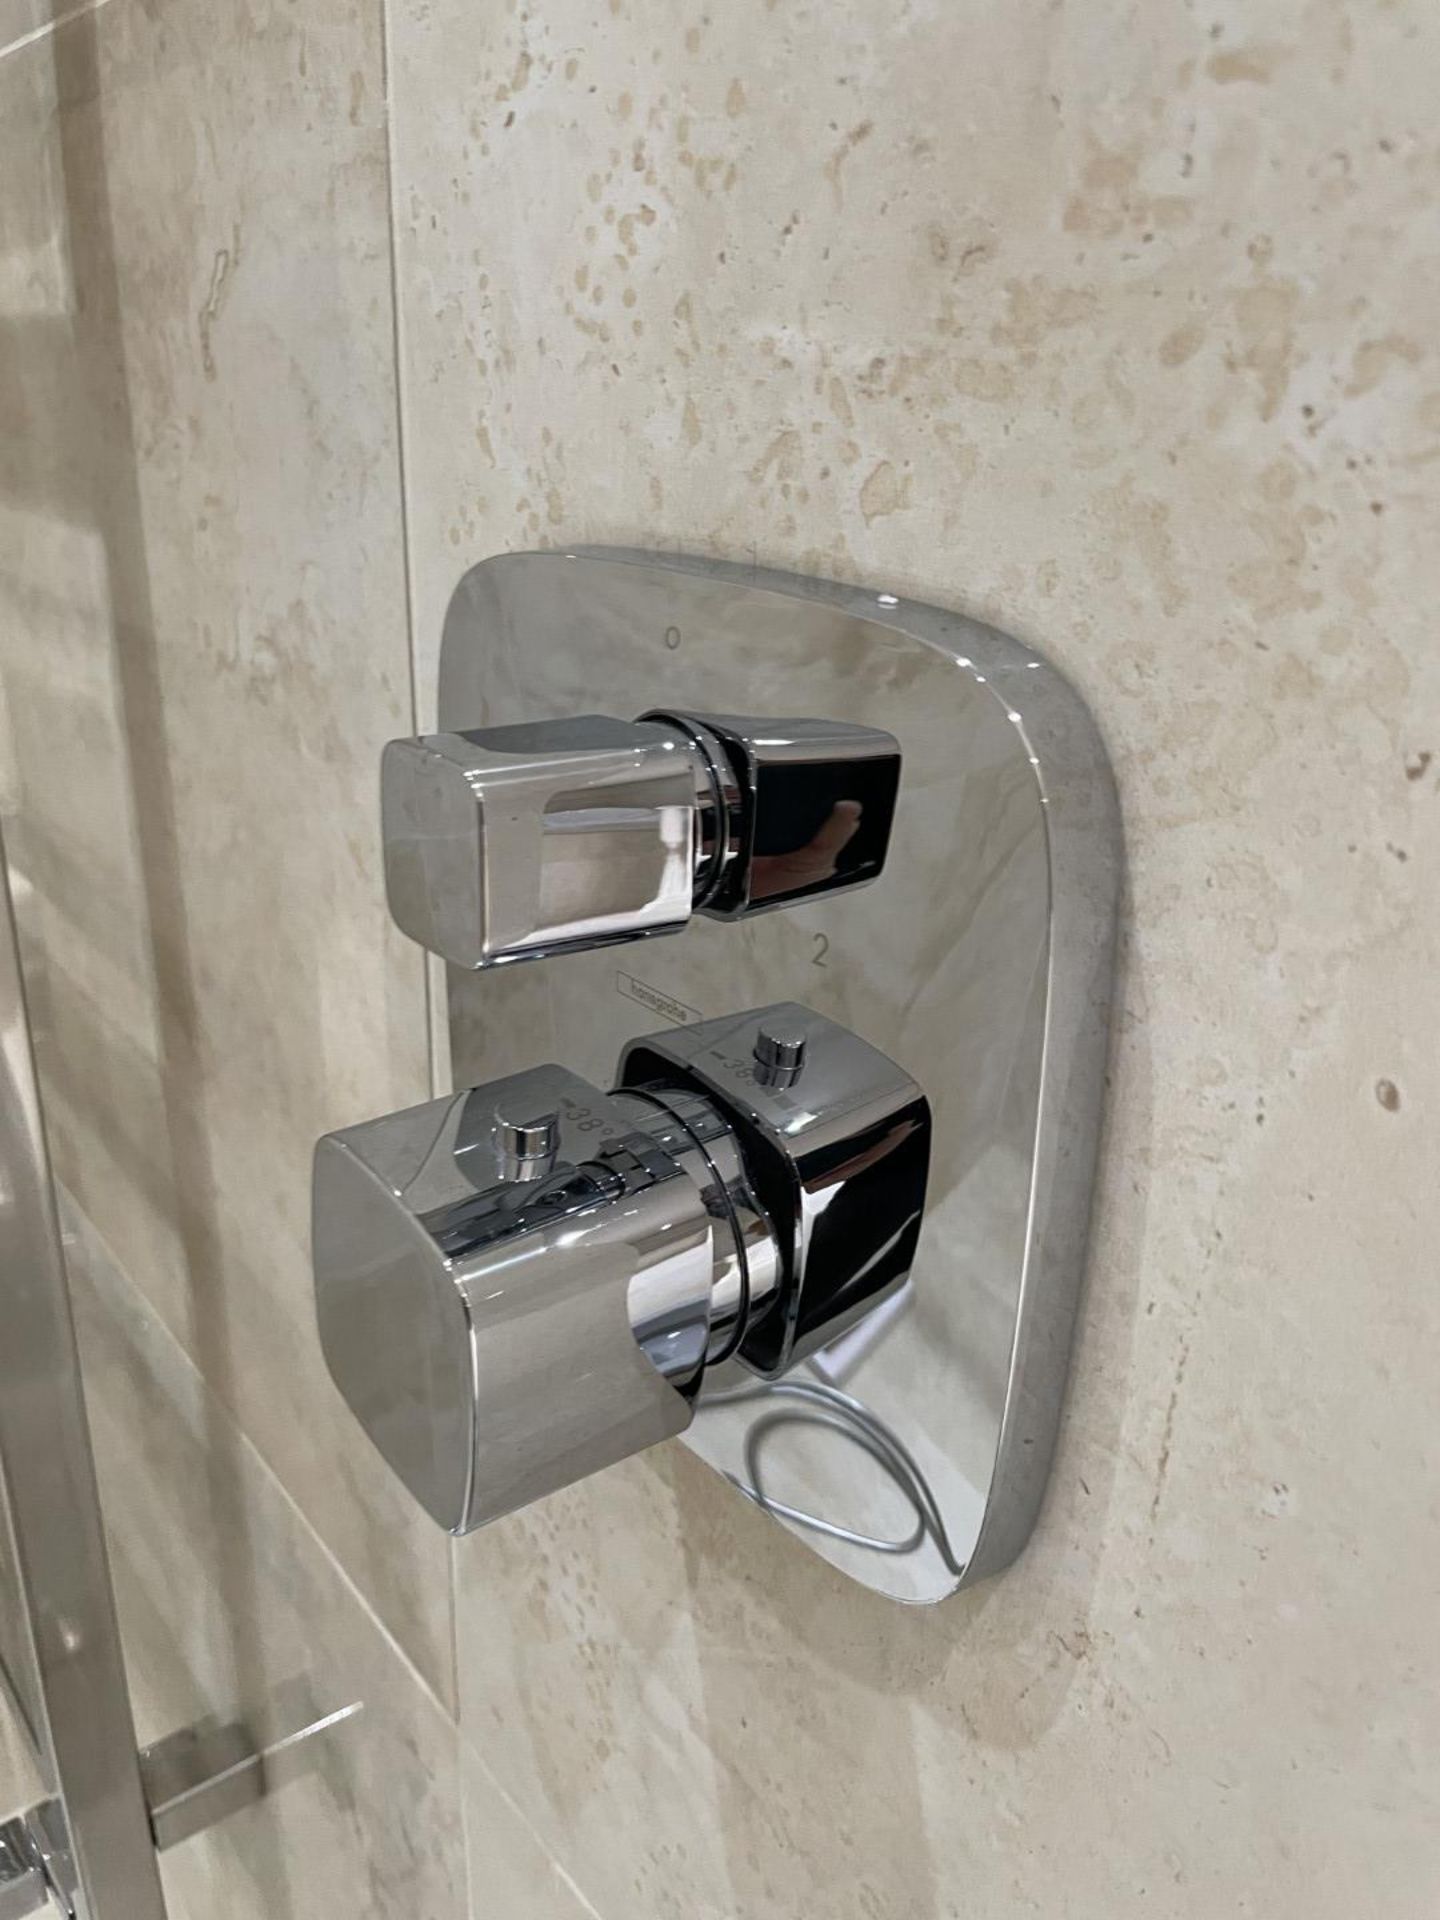 1 x Premium Shower and Enclosure + Hansgrove Controls and Thermostat - Ref: PAN232 - CL896 - NO - Image 12 of 21